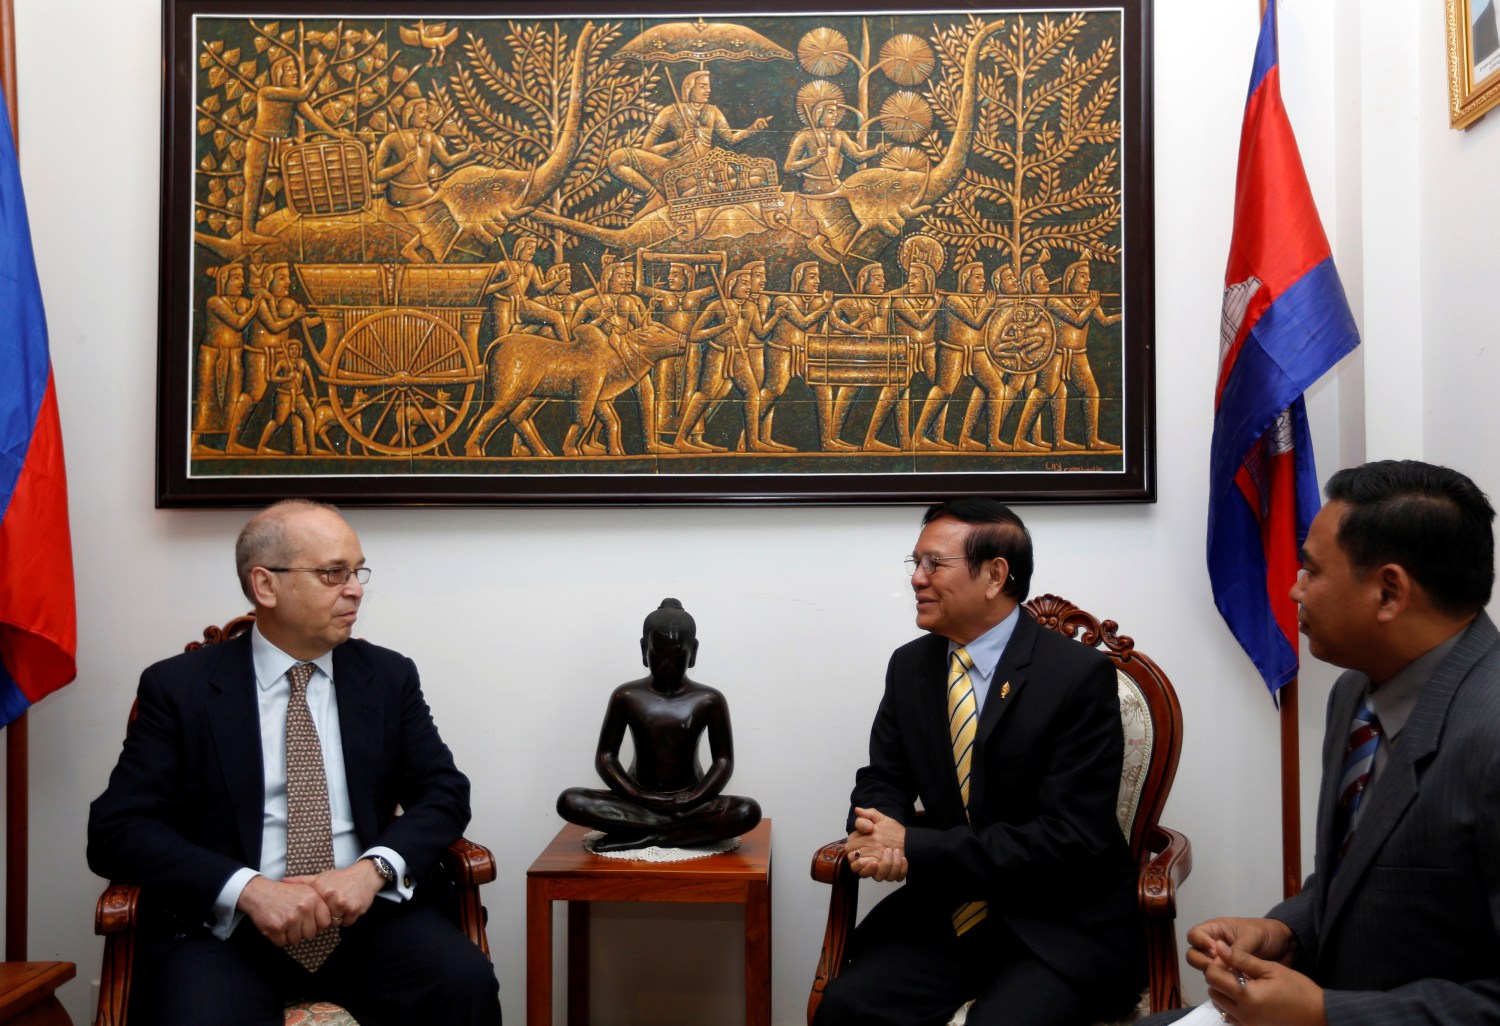 U.S. Assistant Secretary of State for East Asian and Pacific Affairs Daniel Russel attends a meeting with Kem Sokha, leader of the Cambodia National Rescue Party, at the CNRP headquarters in Phnom Penh